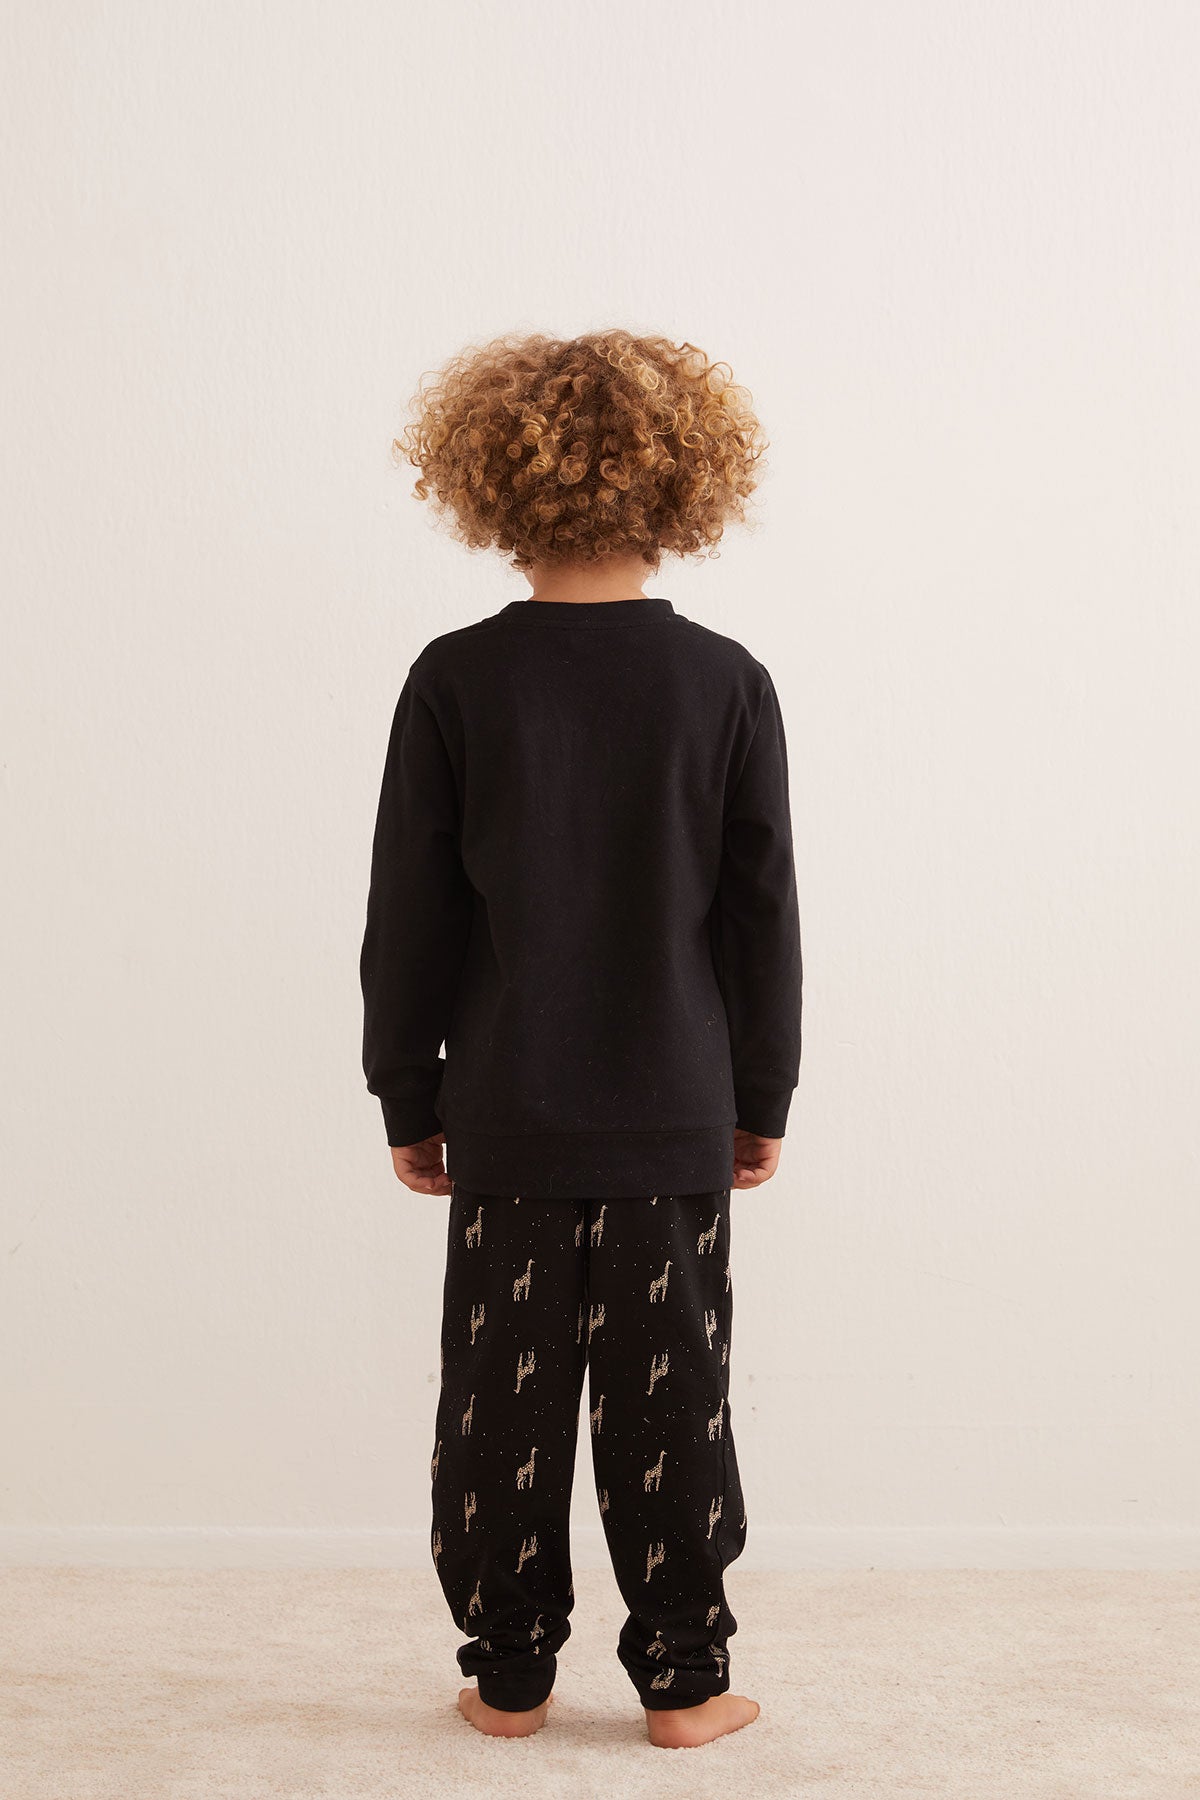 long-sleeved pajama shirt with long pants for children - 4